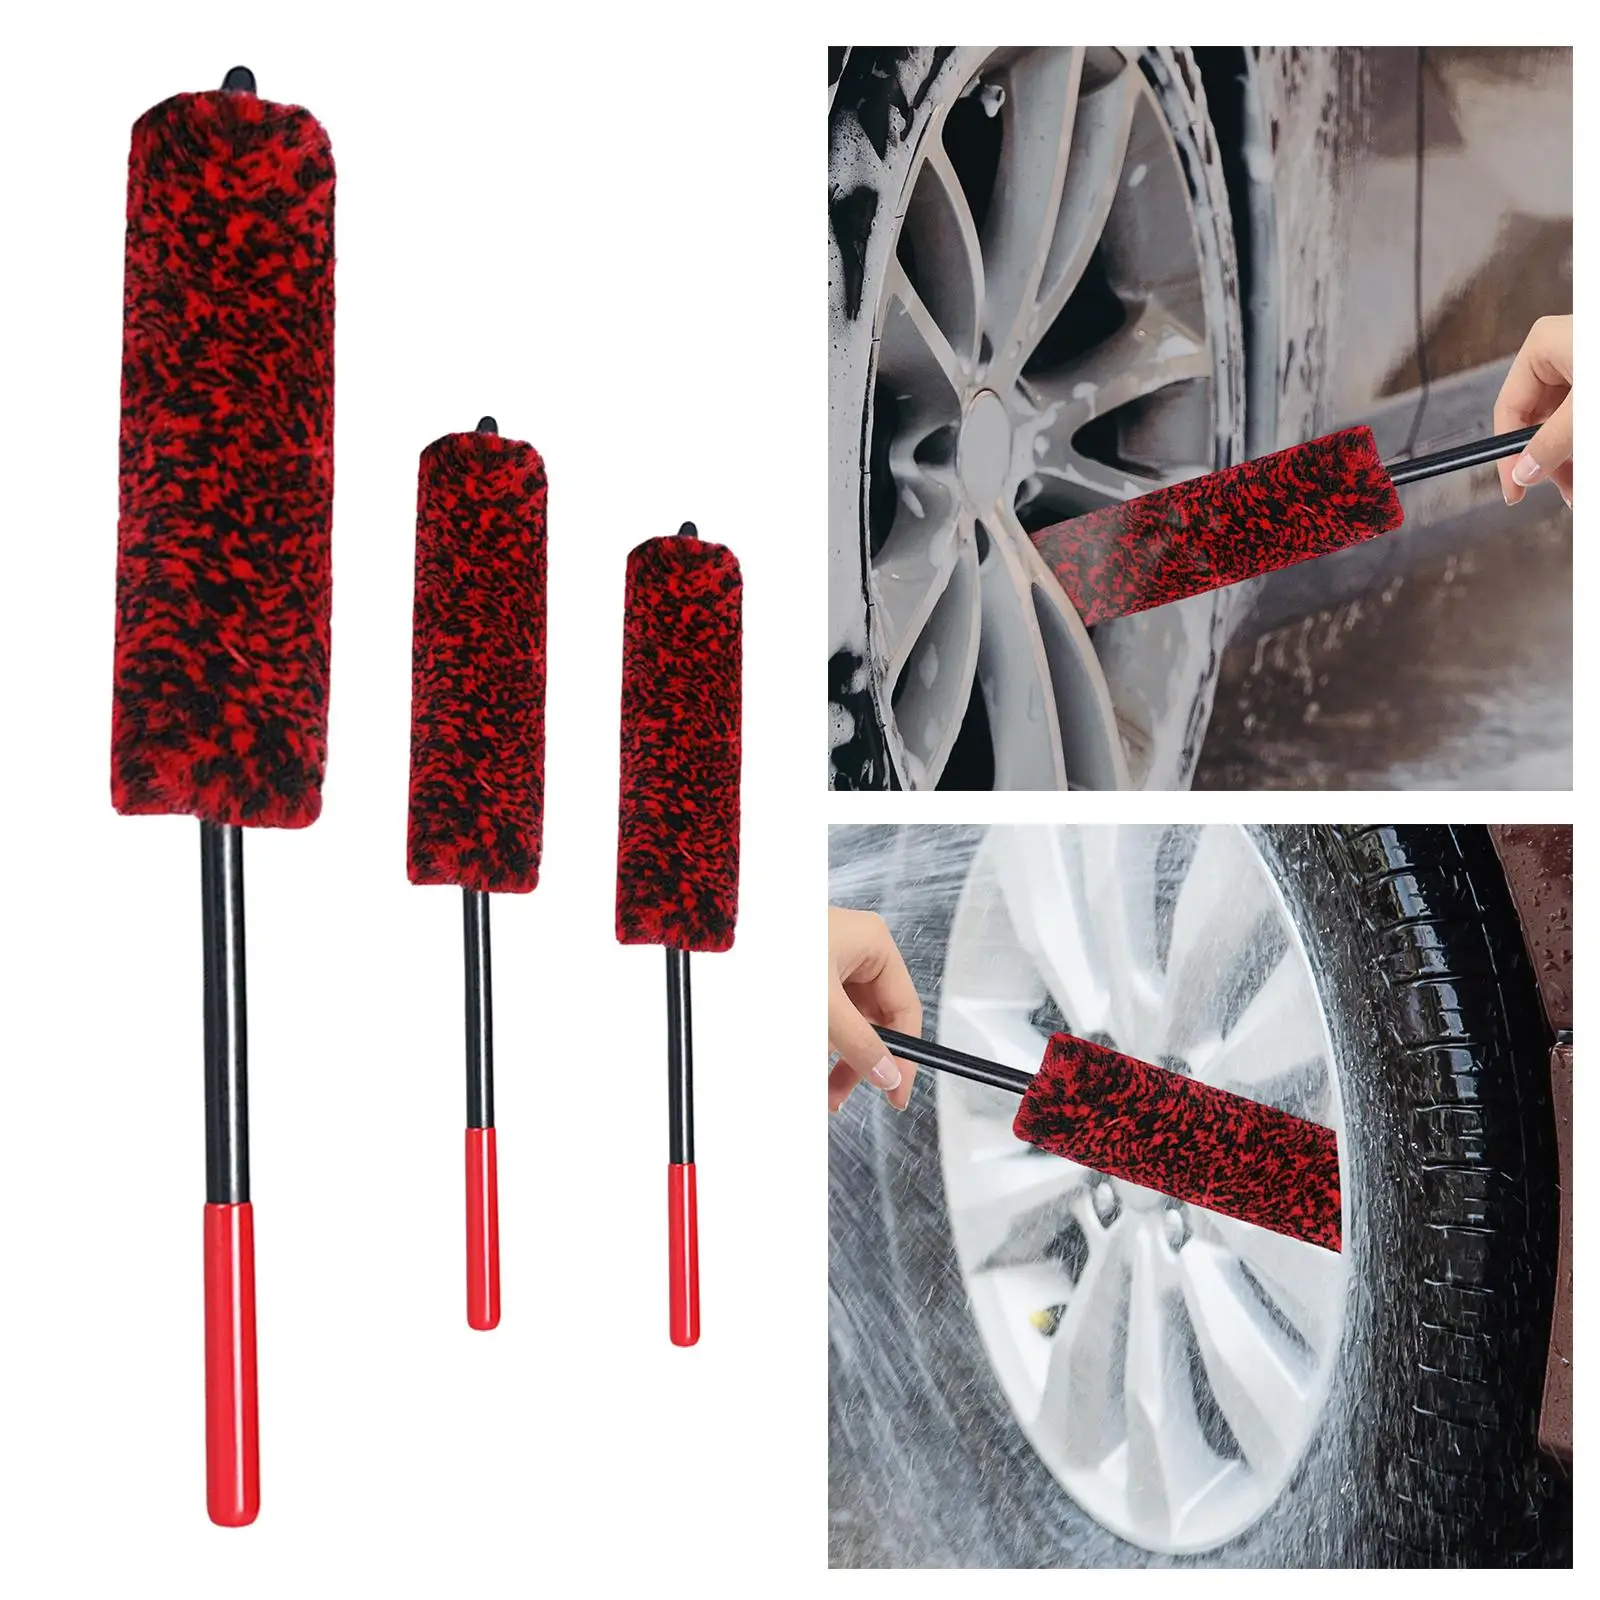 Auto Wheel Detailing Brush Car Cleaning Supplies Bendable Soft Long Handle Car Wheel Brush for Washing Wheels Rims Exterior